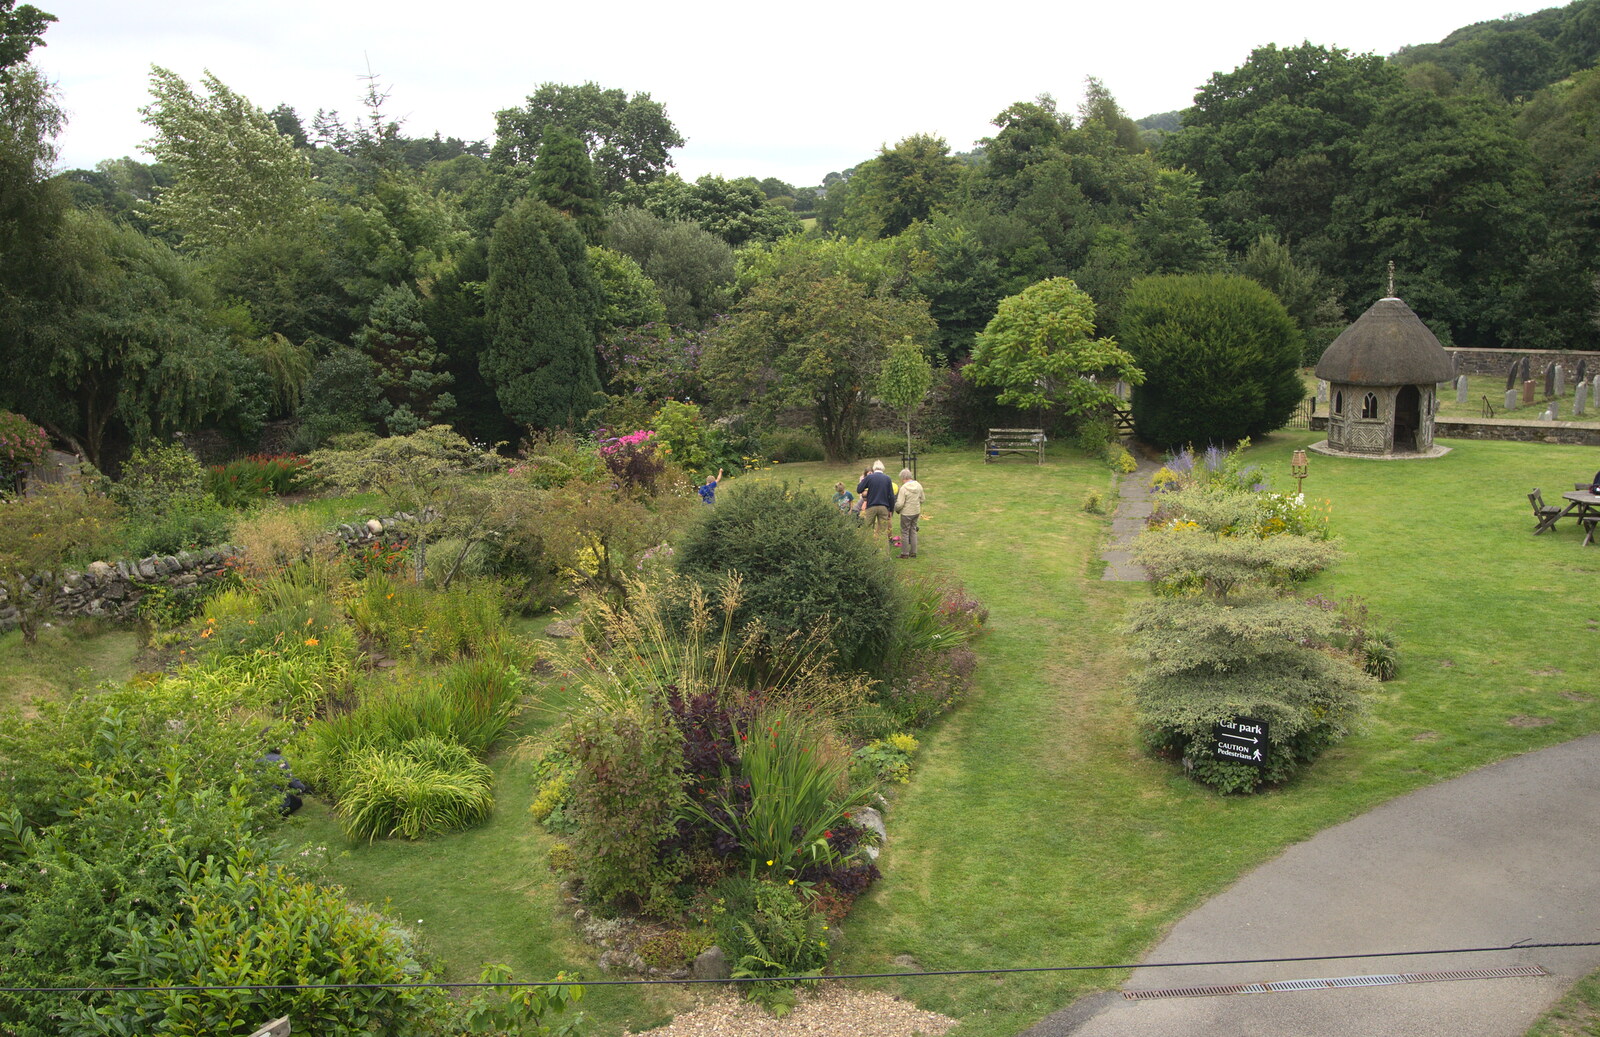 Finch Foundry's gardens from Finch's Foundry and Lydford Gorge, Dartmoor, Devon - 12th August 2016